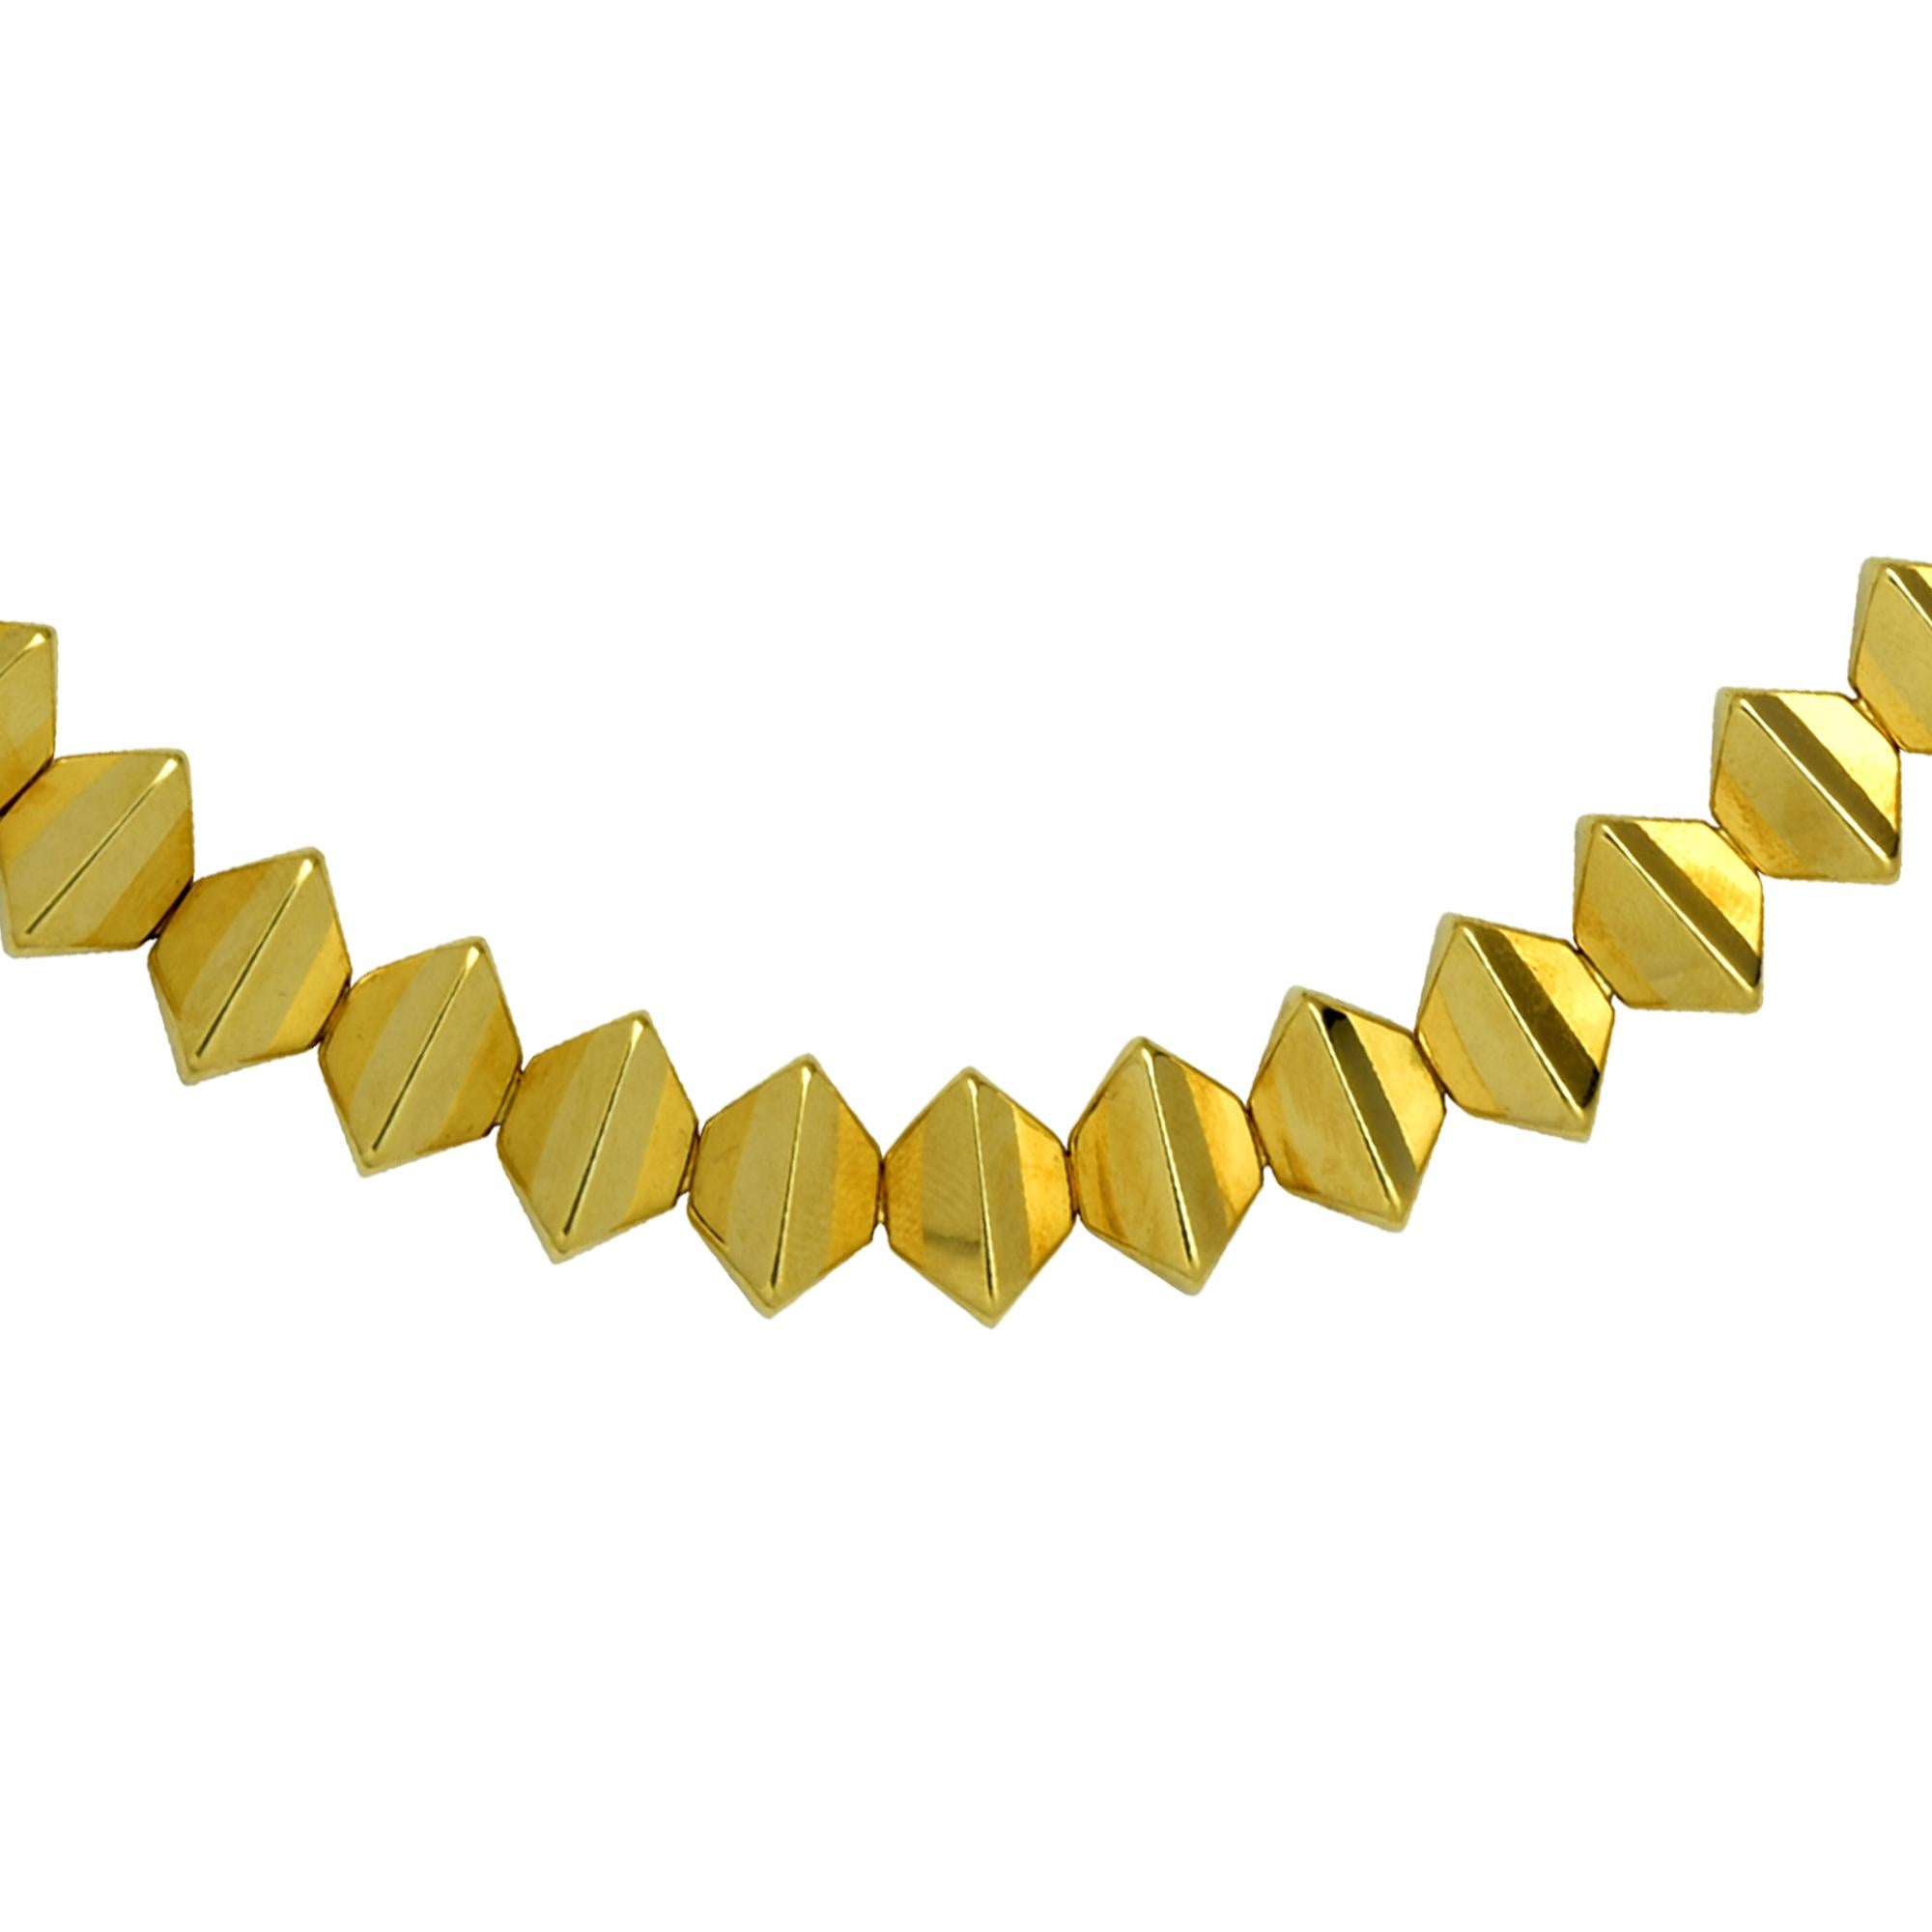 Gorgeous necklace crafted in 18 karat yellow gold featuring geometric shapes flowing together to create the illusion of a seamless stream of triangular pyramids. This eye catching necklace measures 16.5 inches and weighs 44.16 grams.

